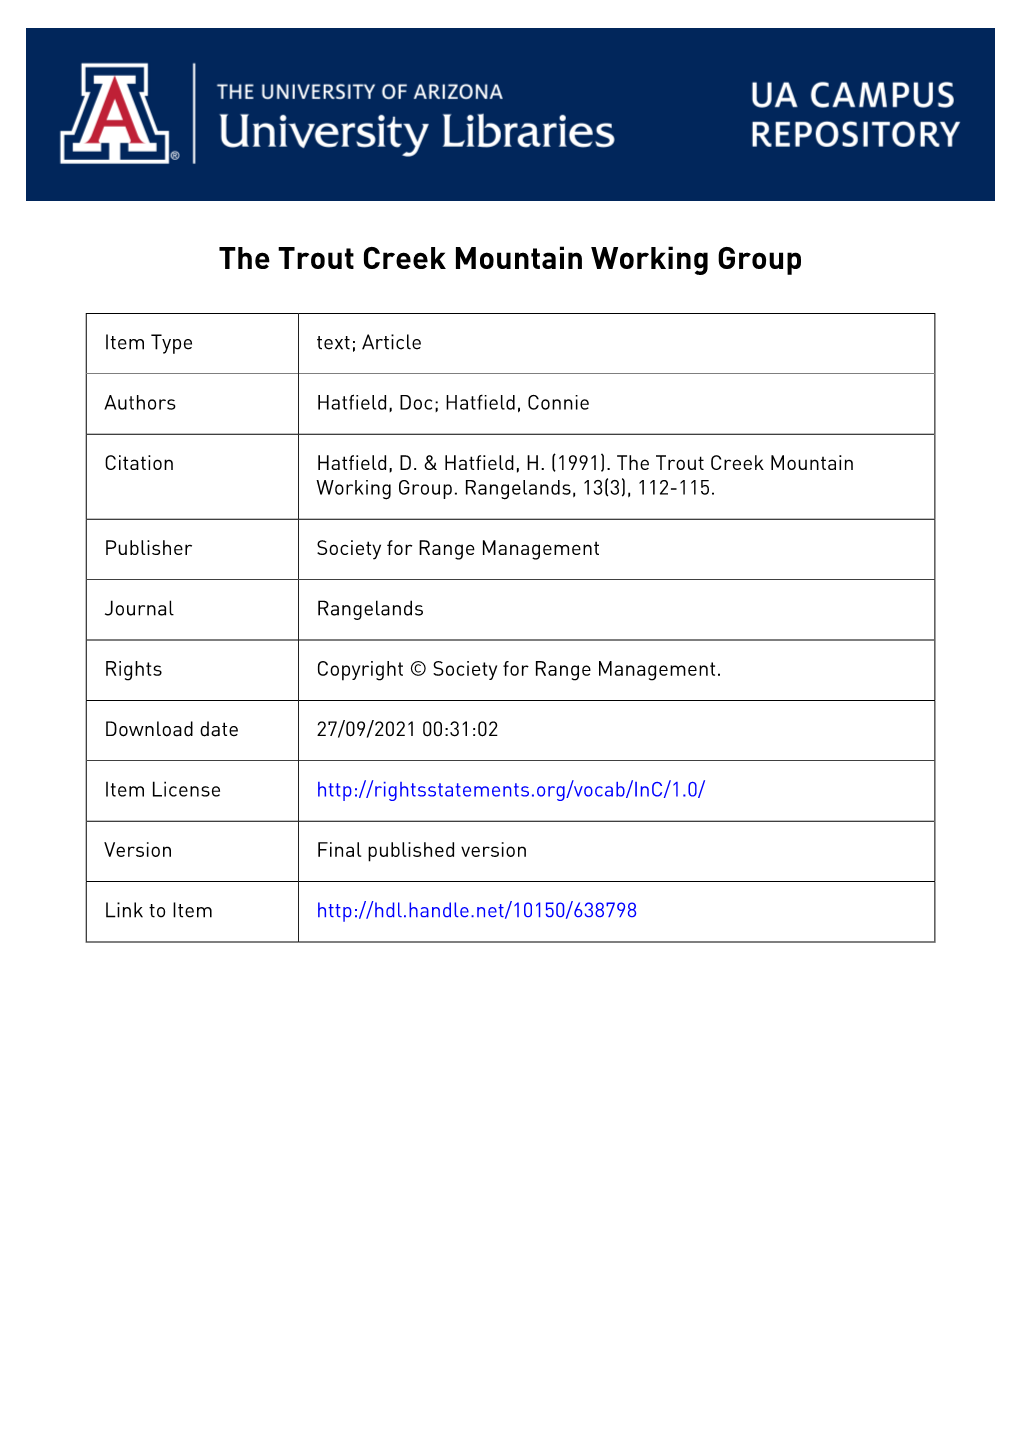 The Trout Creek Mountain Working Group